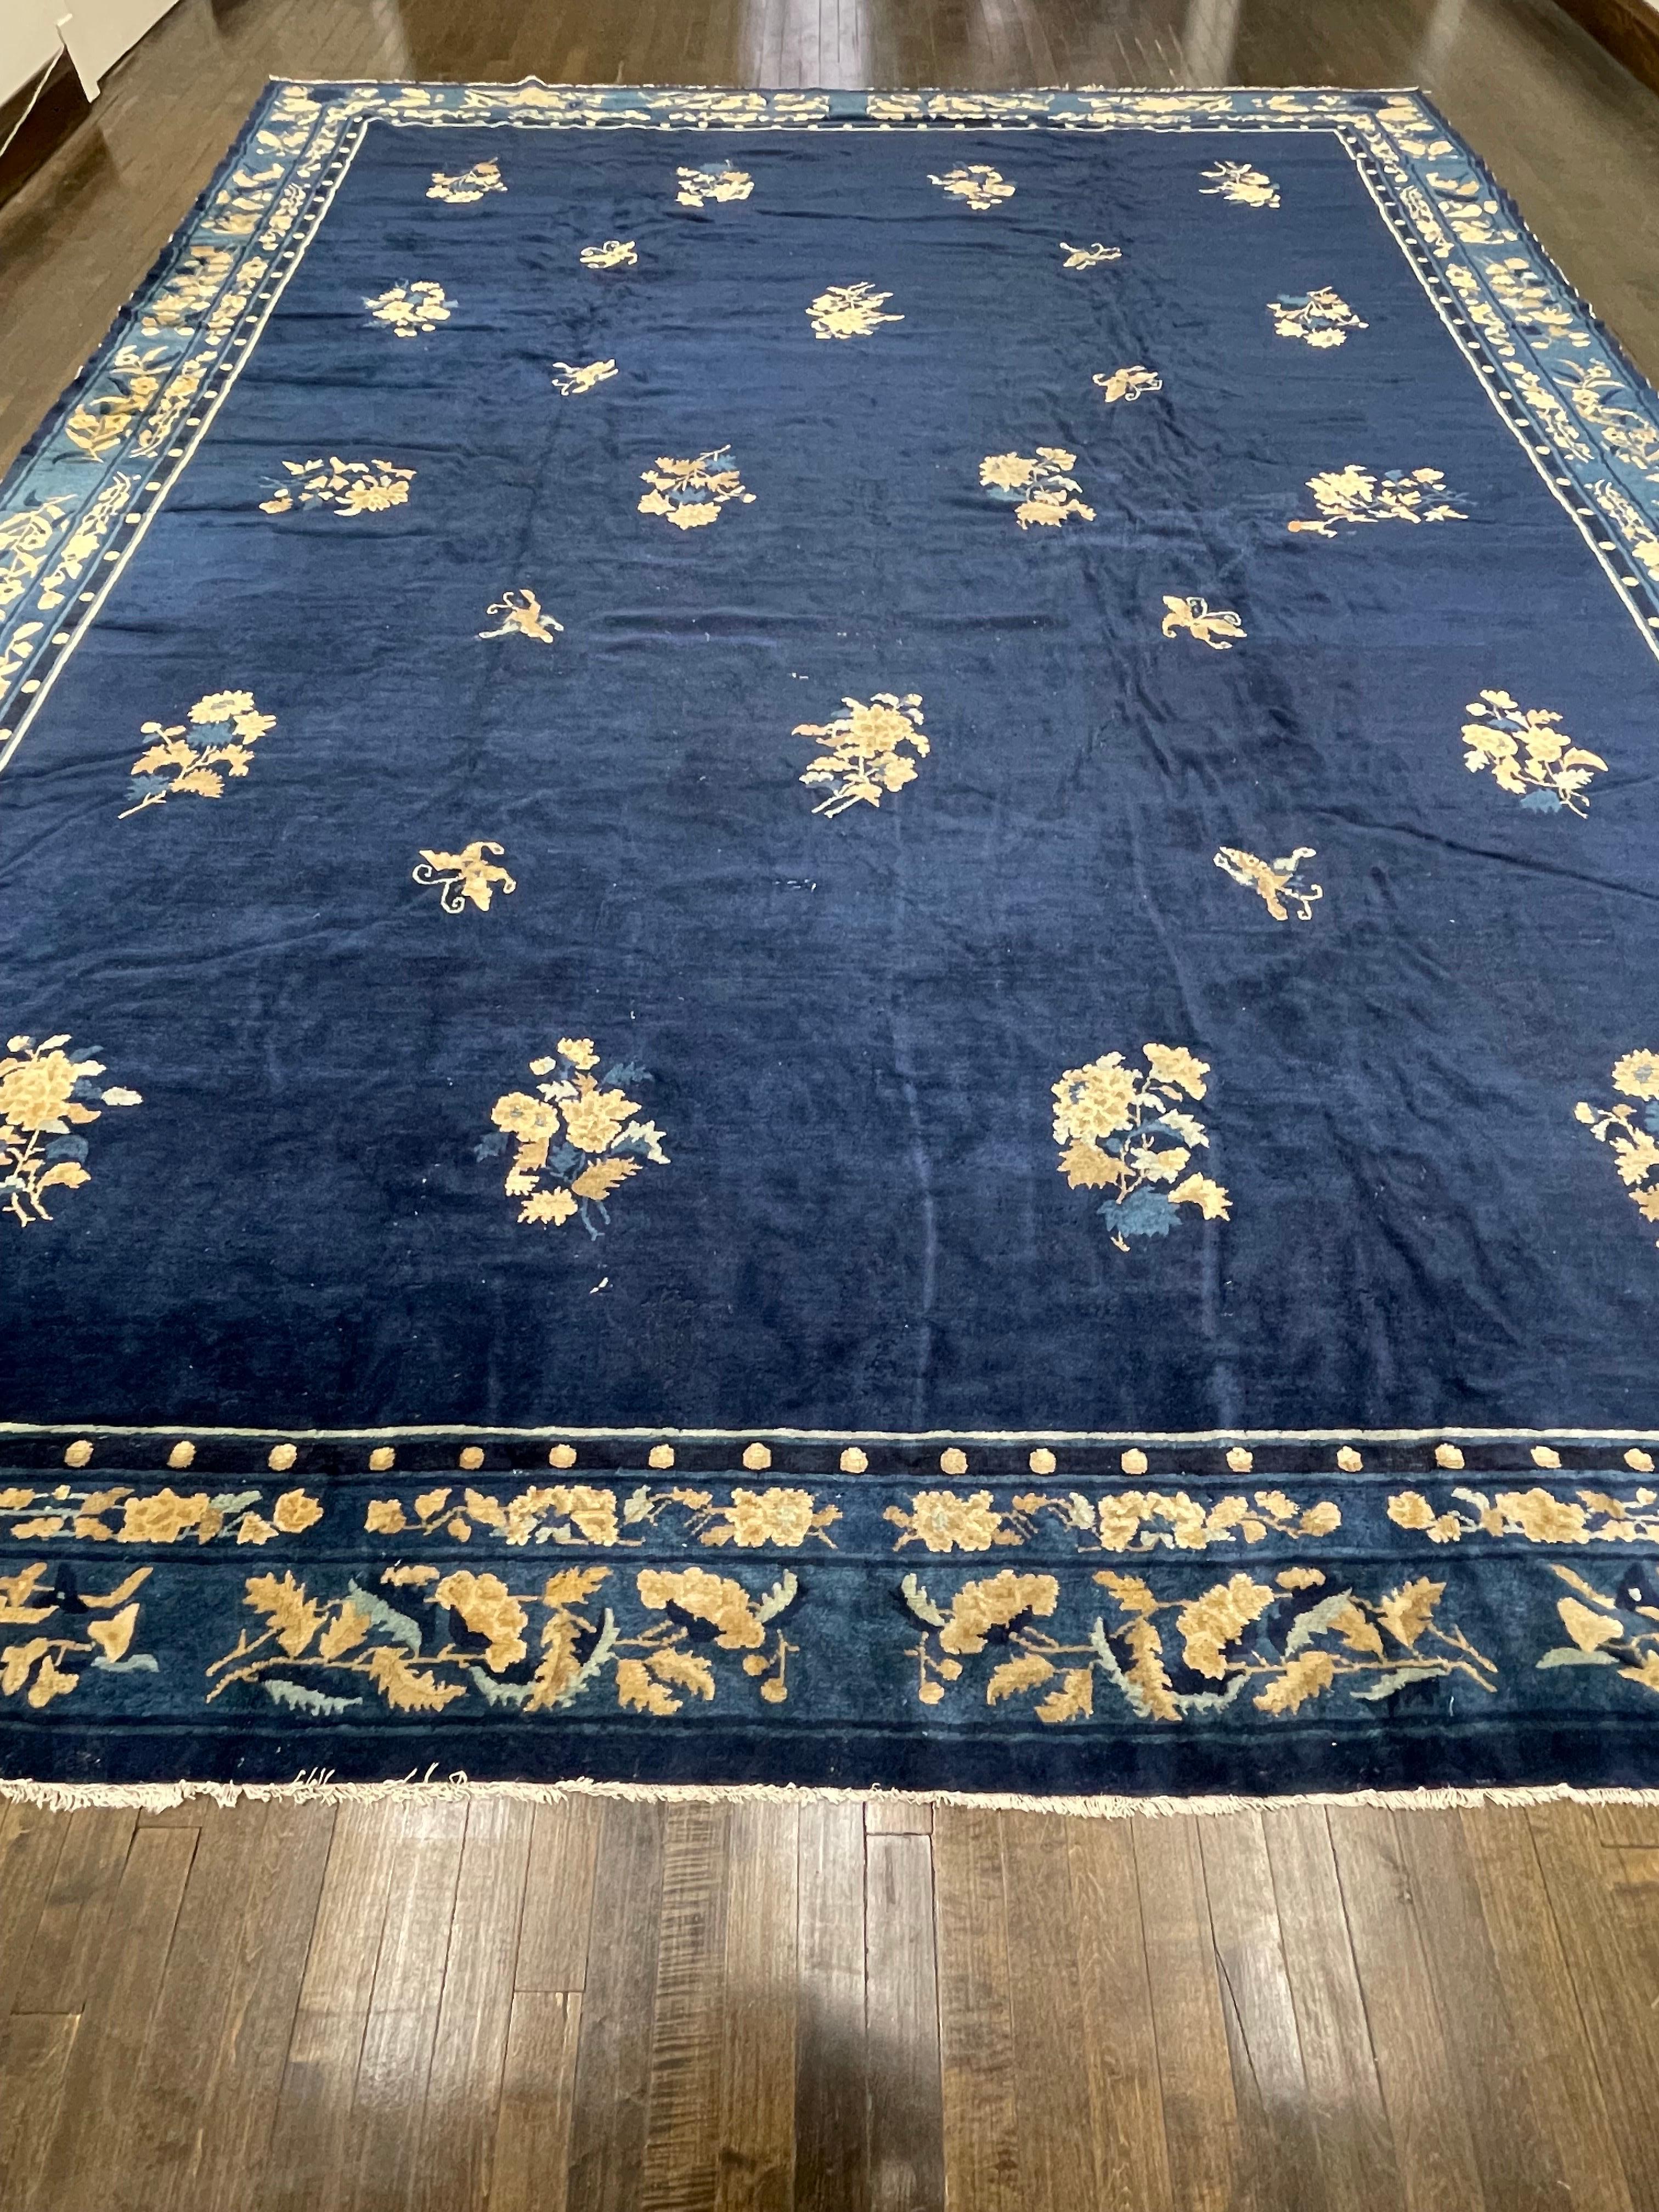 A classic 19th century Chinese carpet with a sparsely decorated field, this rug is handwoven with very fine knots on a rare indigo blue field. Known as a Peking Chinese this rug is framed with a spectacular border.

Wool used to make this rug is